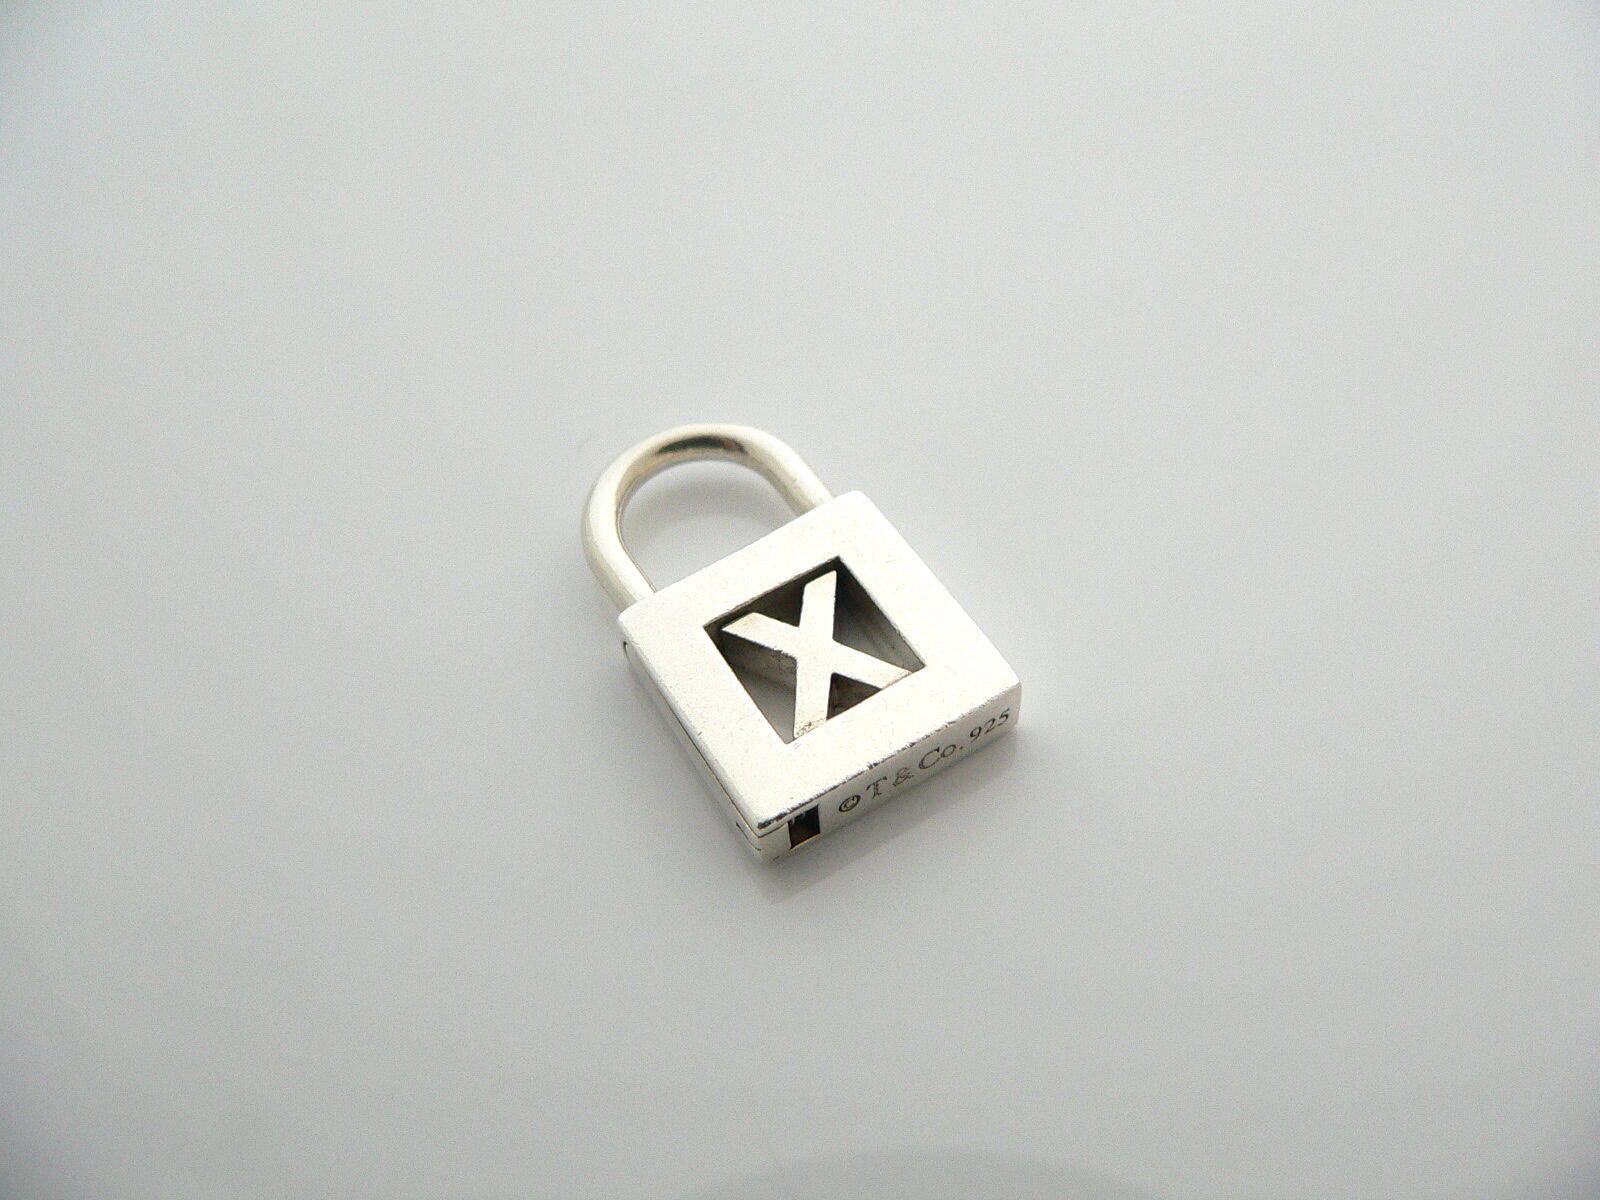 Personalized Padlock Necklace